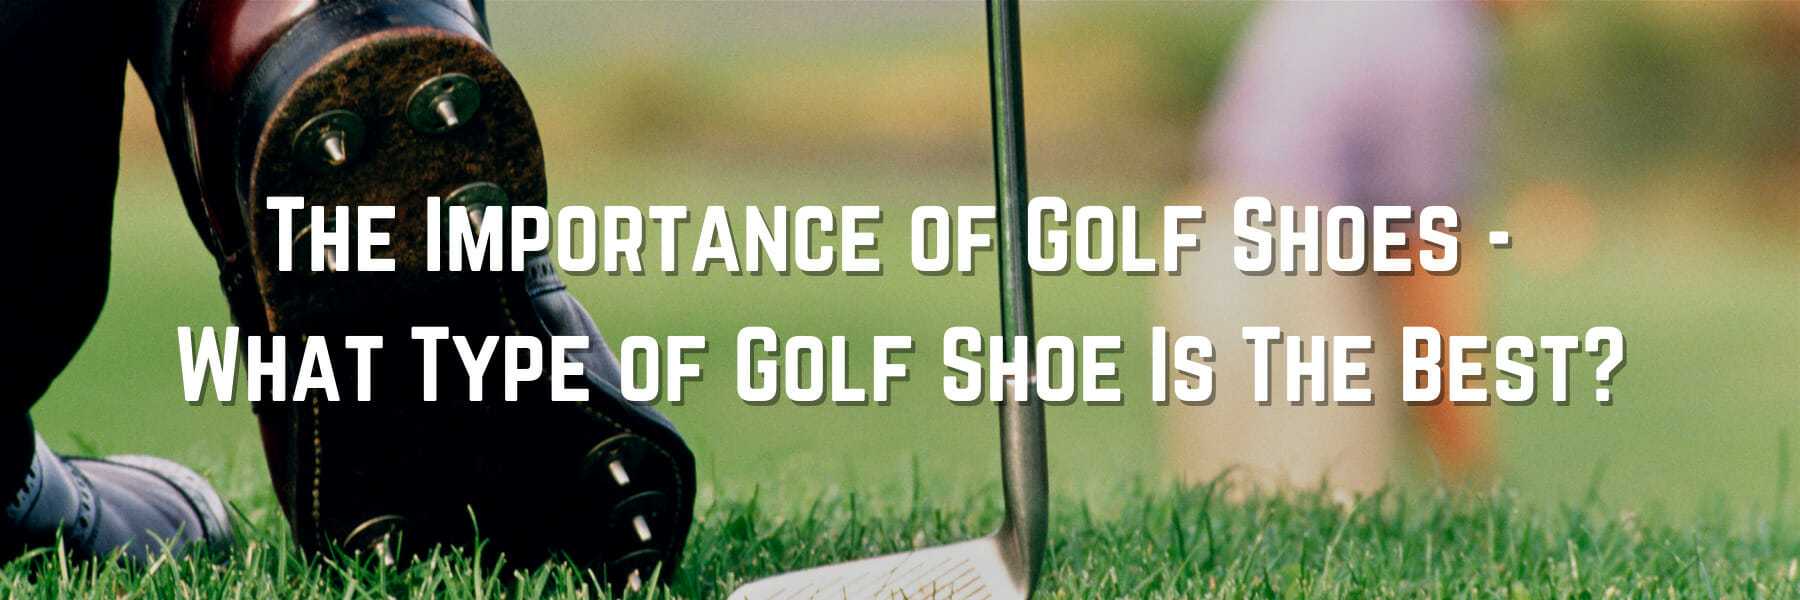 The Importance of Golf Shoes -  What Type of Golf Shoe Is The Best?